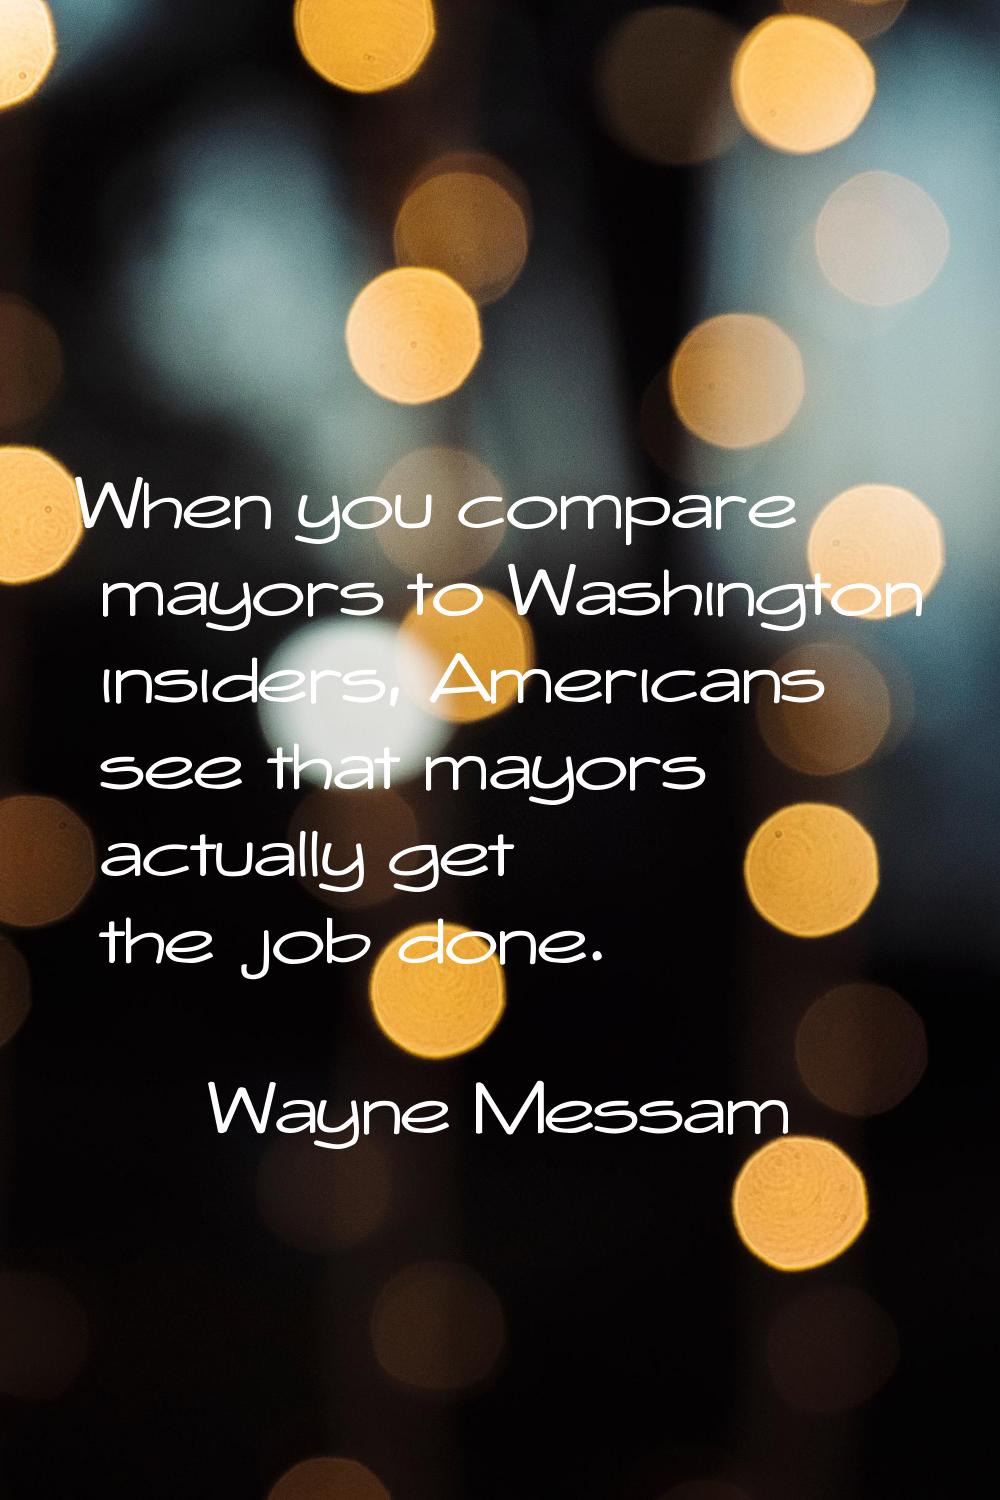 When you compare mayors to Washington insiders, Americans see that mayors actually get the job done